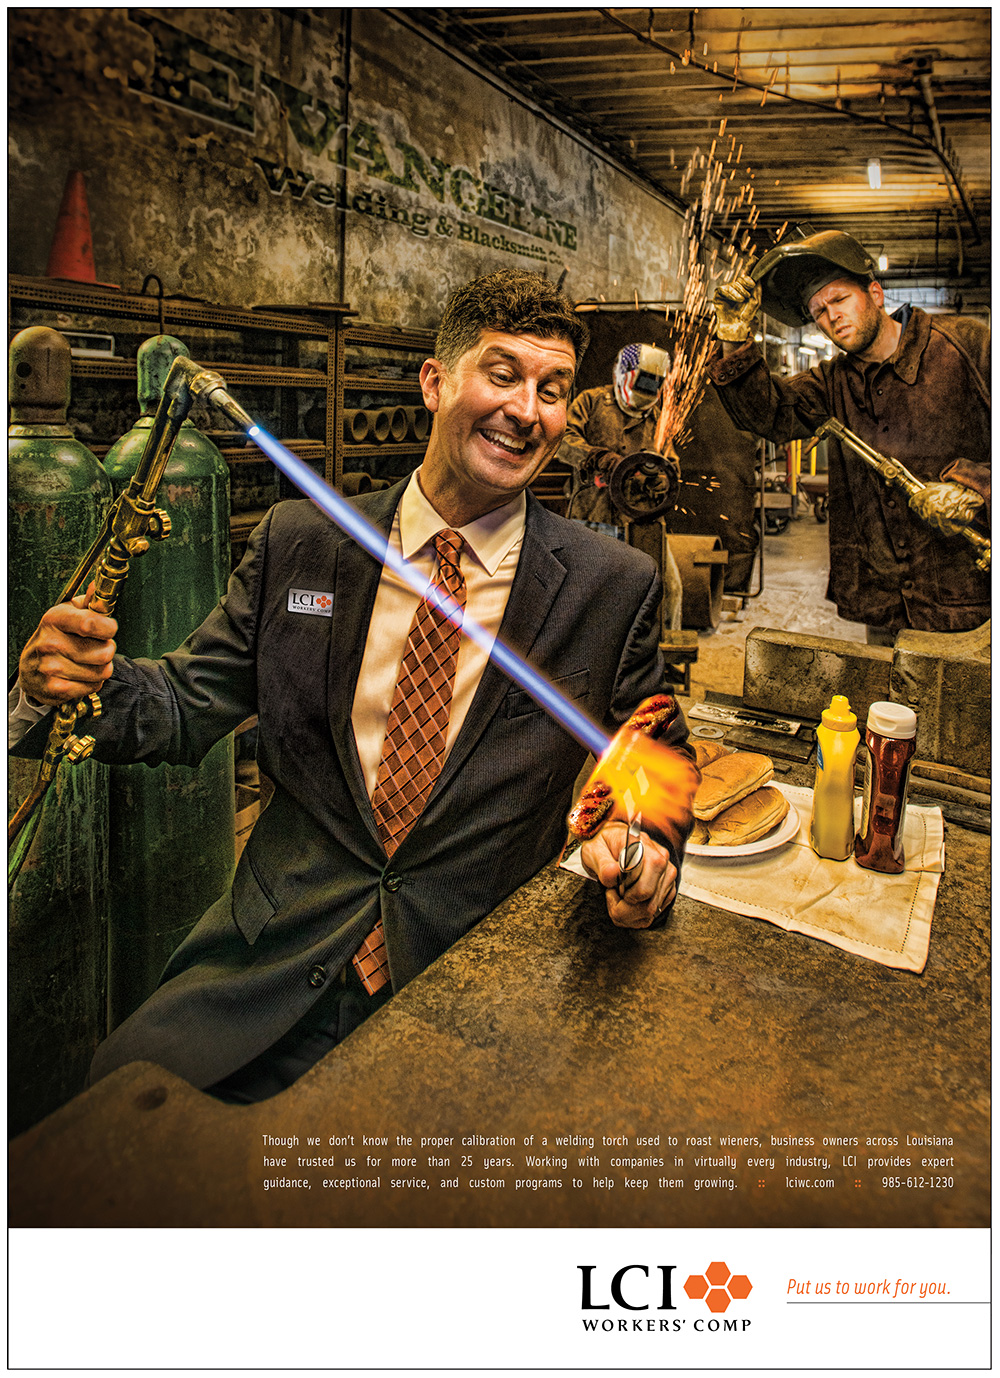 LCI Workers' Comp Advertising Campaign Print Ad shot at New Orleans welding company.